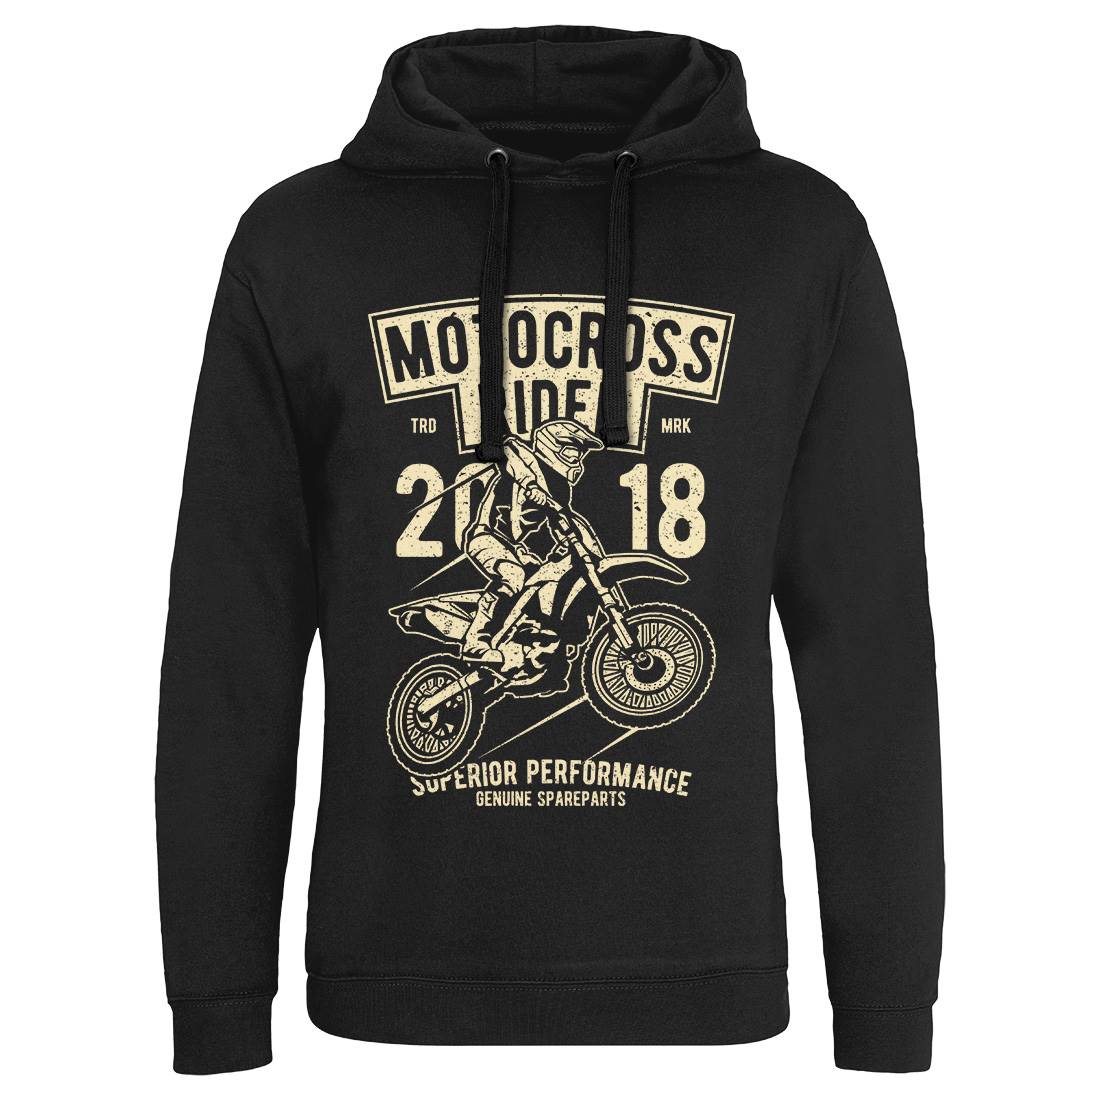 Motocross Rider Mens Hoodie Without Pocket Motorcycles A718